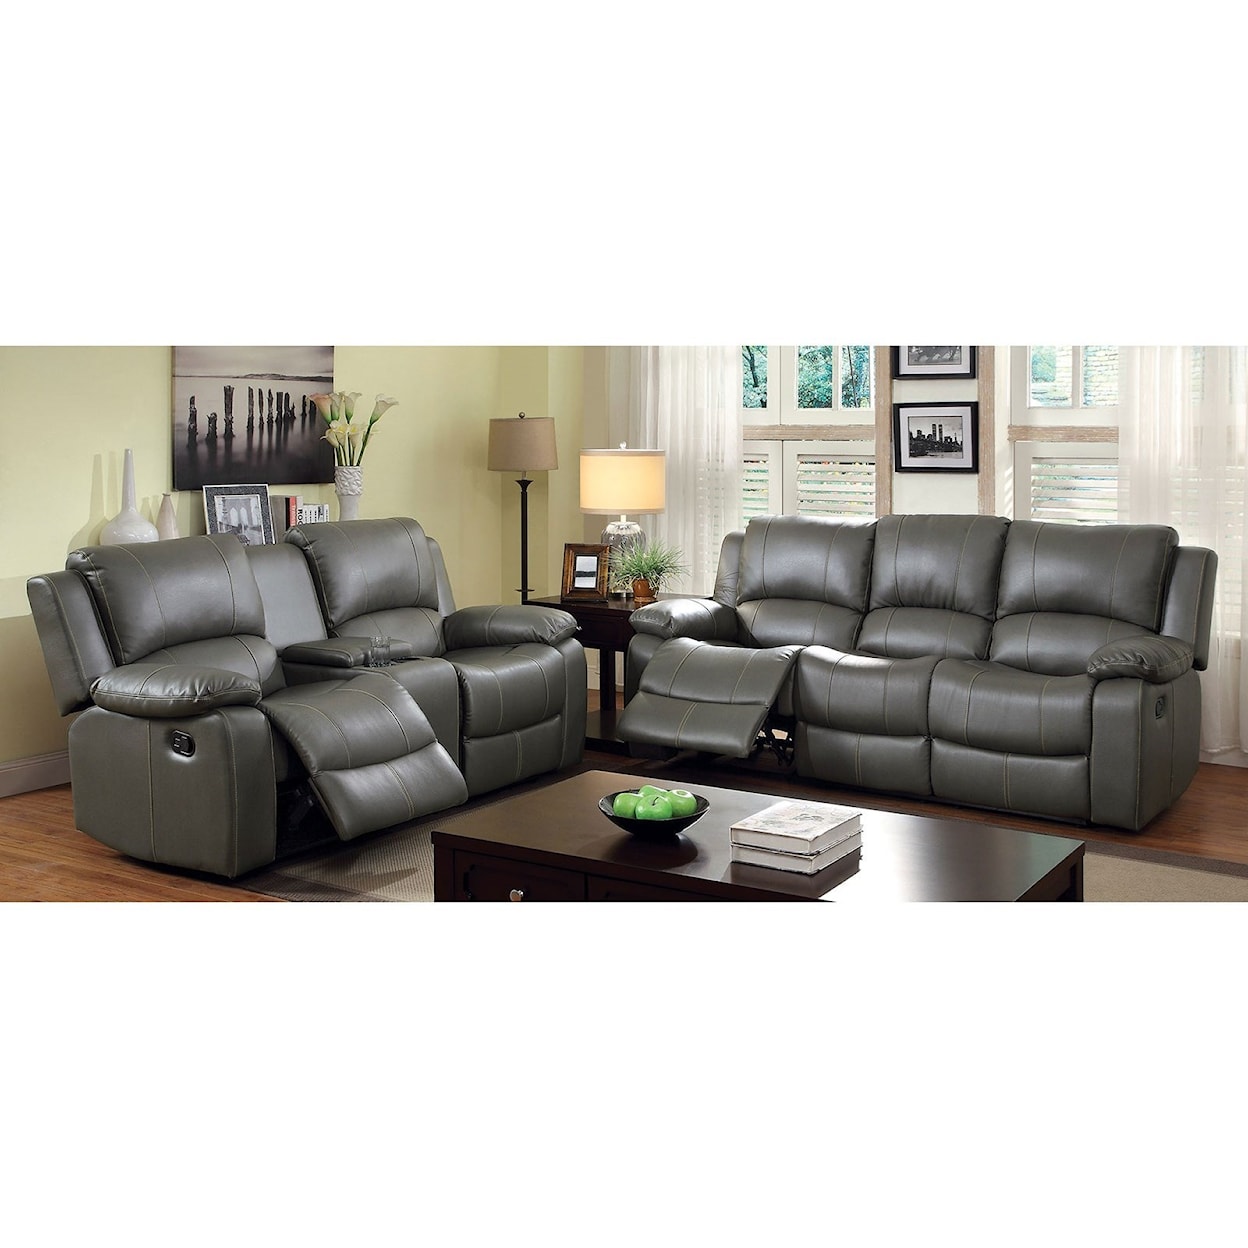 Furniture of America - FOA Sarles Motion Sofa with Drop-Down Table